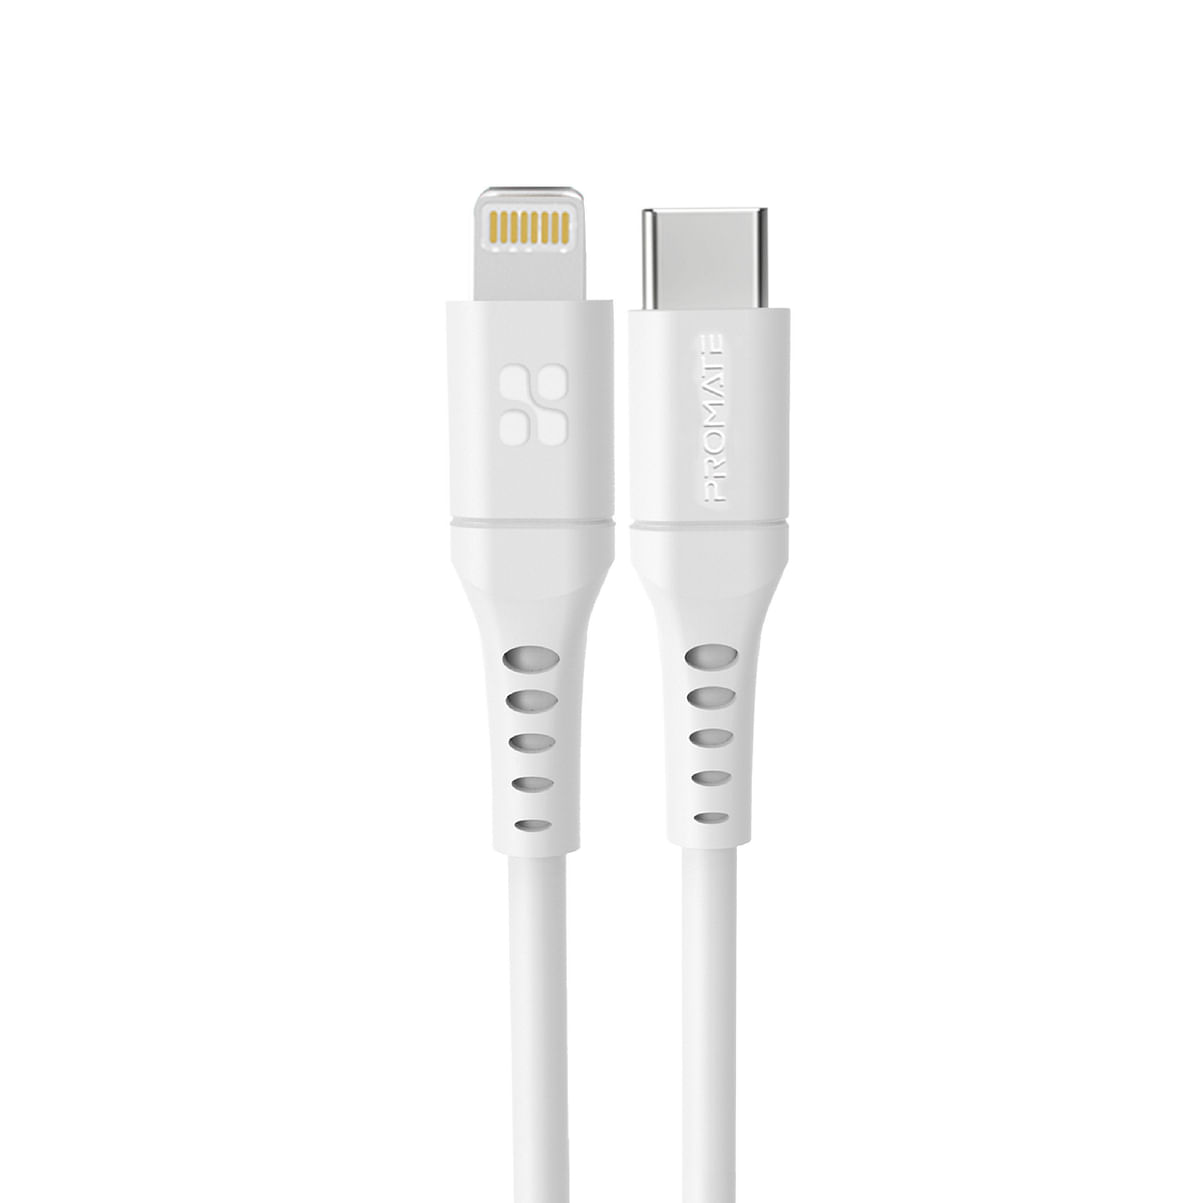 Promate USB-C to Lightning Cable 3m, Powerful 20W Power Delivery Fast Charging Silicone Lightning Cable with 480 Mbps Data Sync and 3A Power Output for iPhone 13/13 Pro/13 Pro Max, iPad Pro, PowerLink-300 White